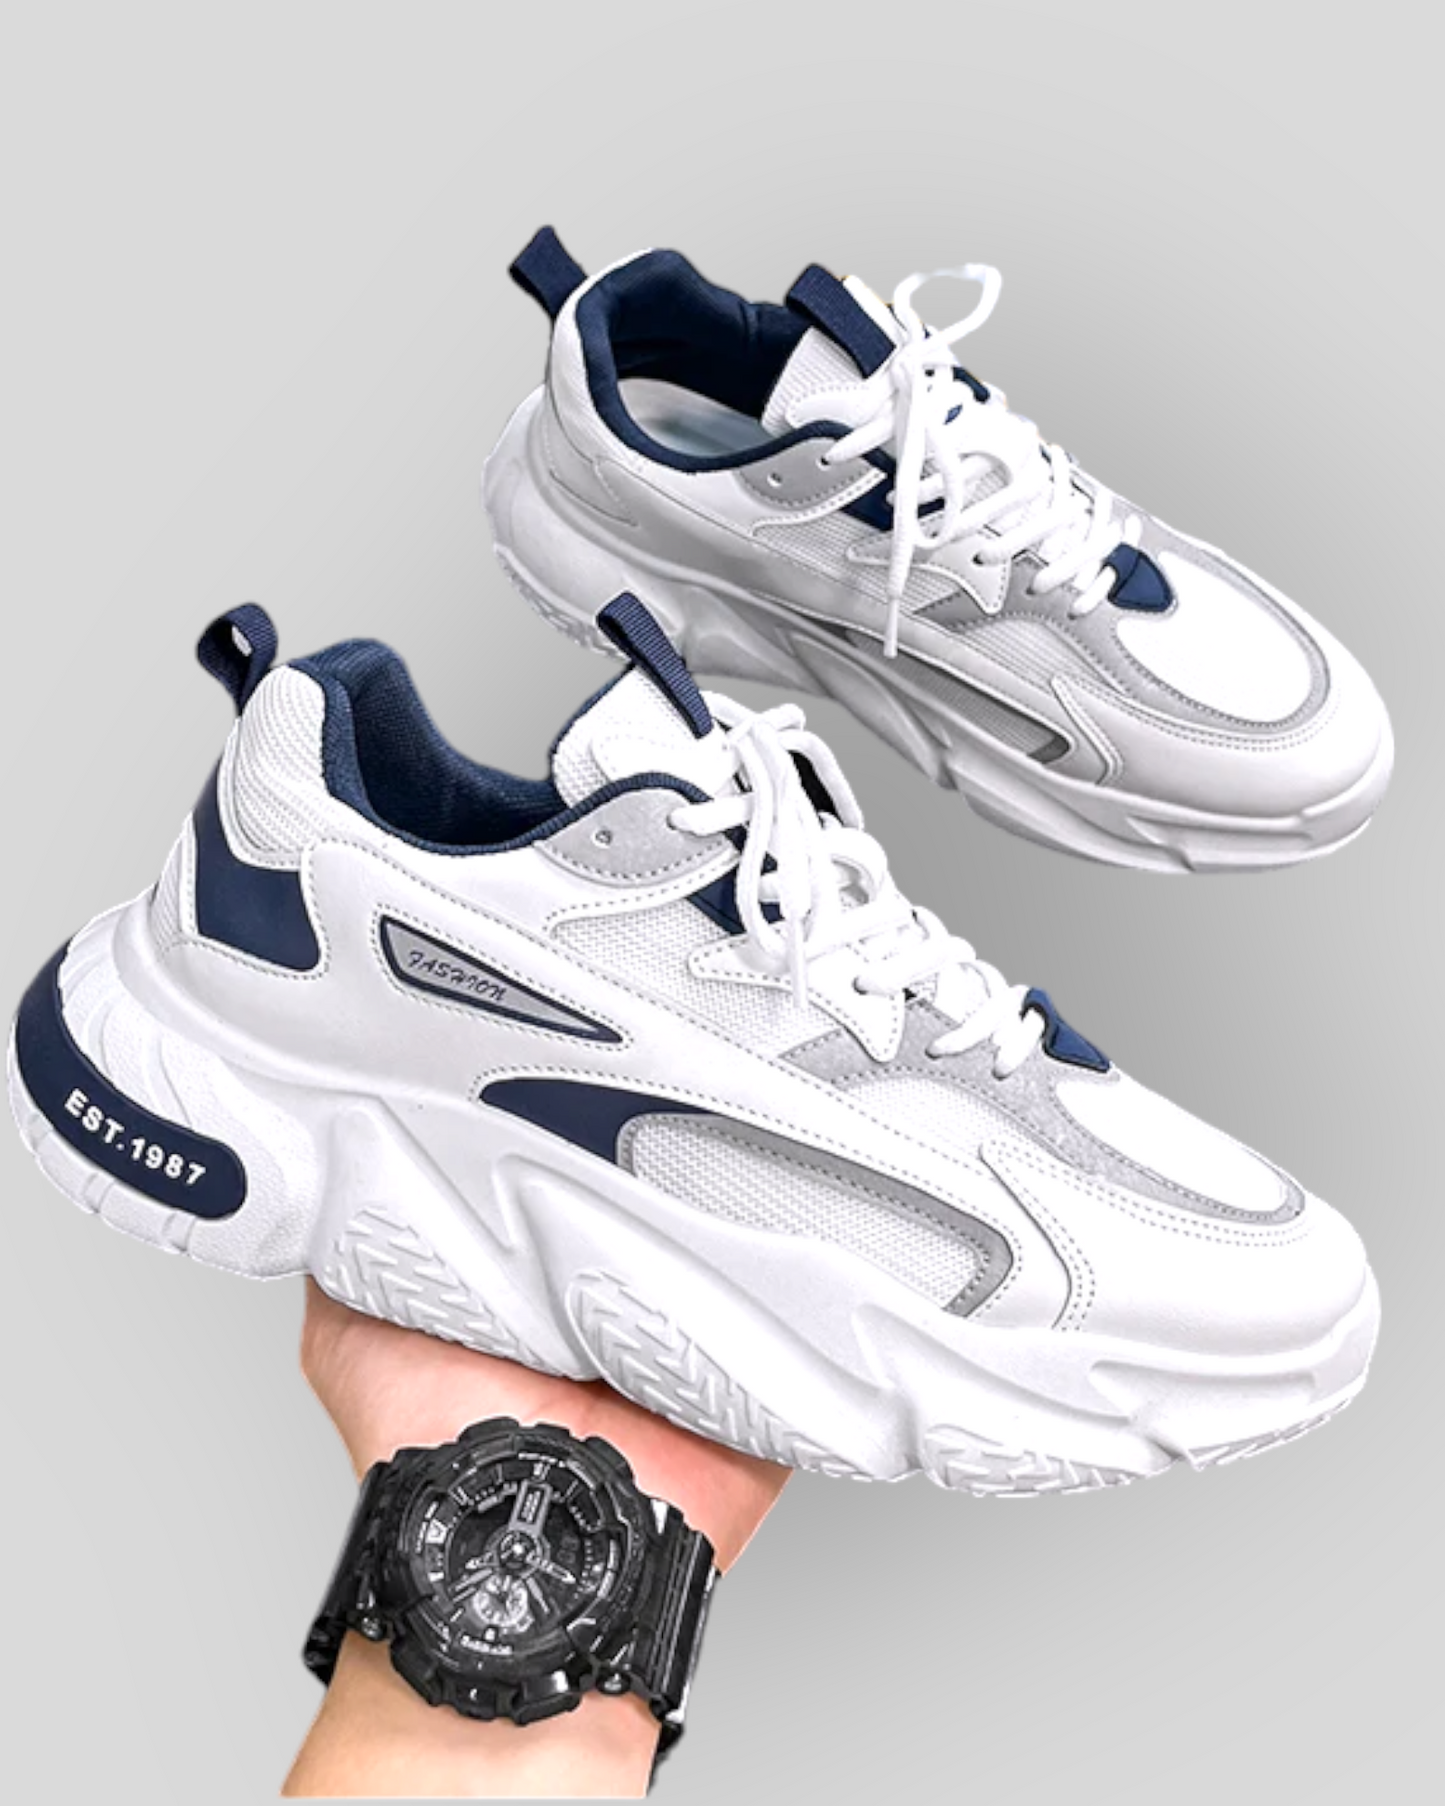 Men's Versatile Chunky White blue Sneakers/ Trainers/ Shoes